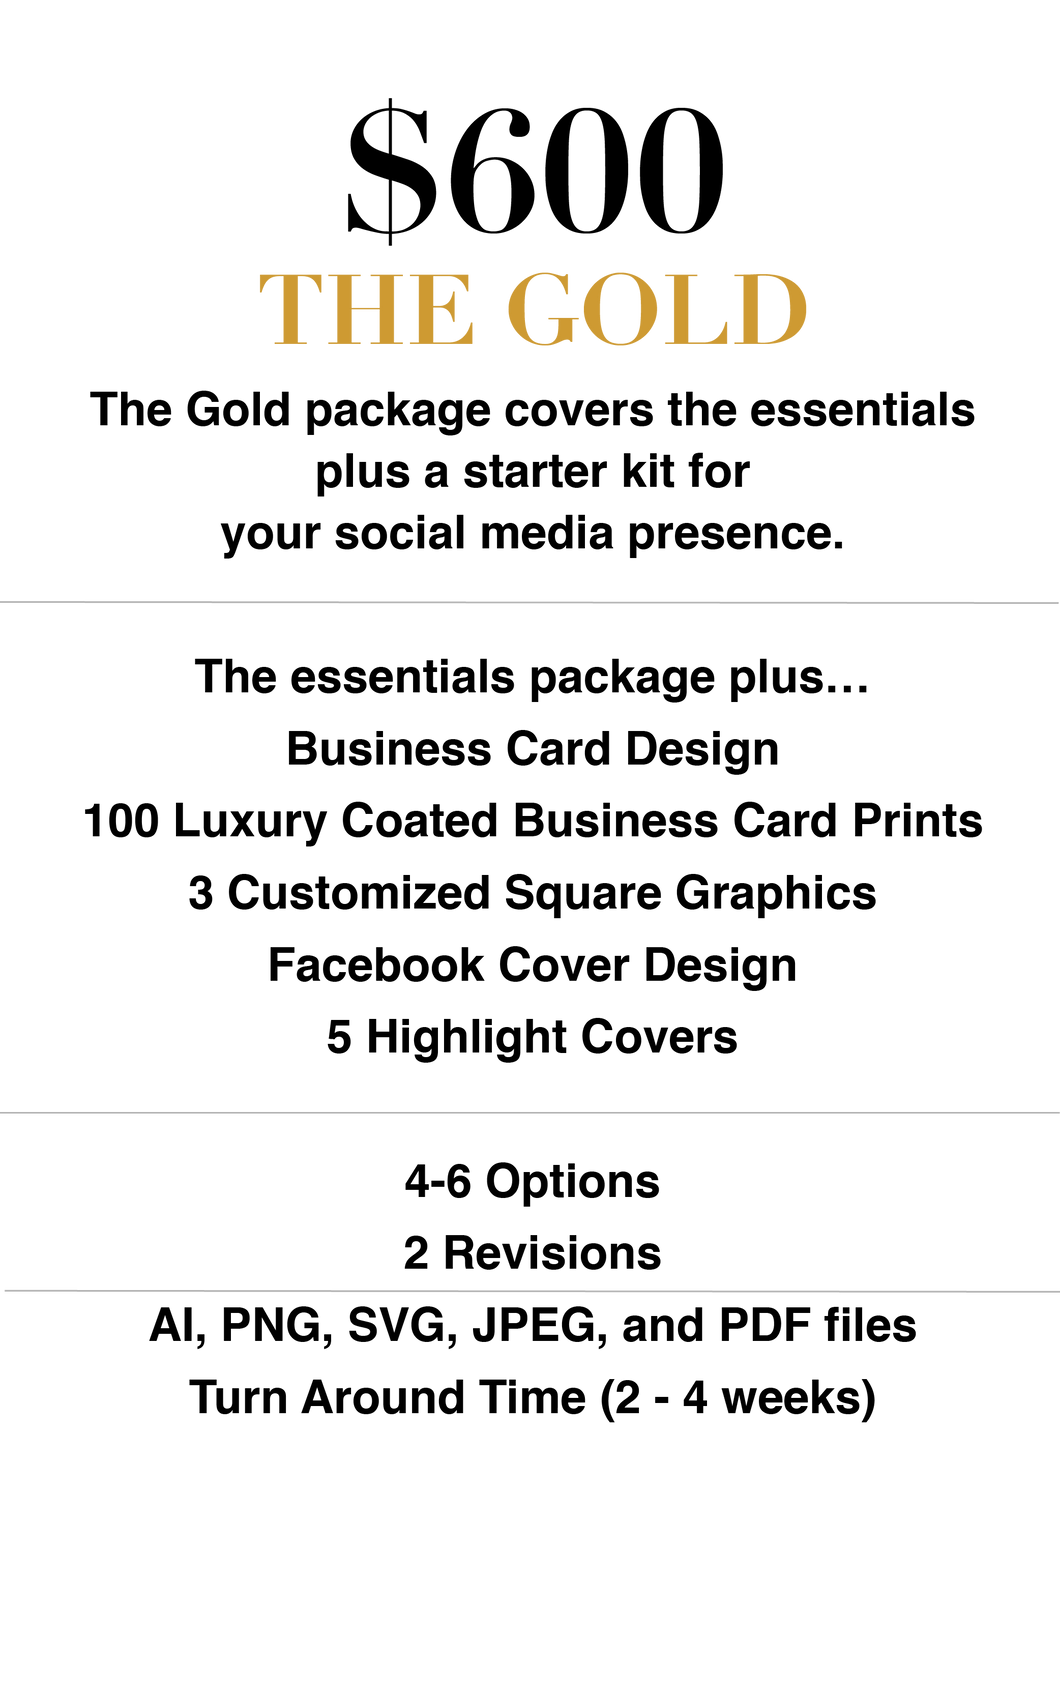 The Gold Package